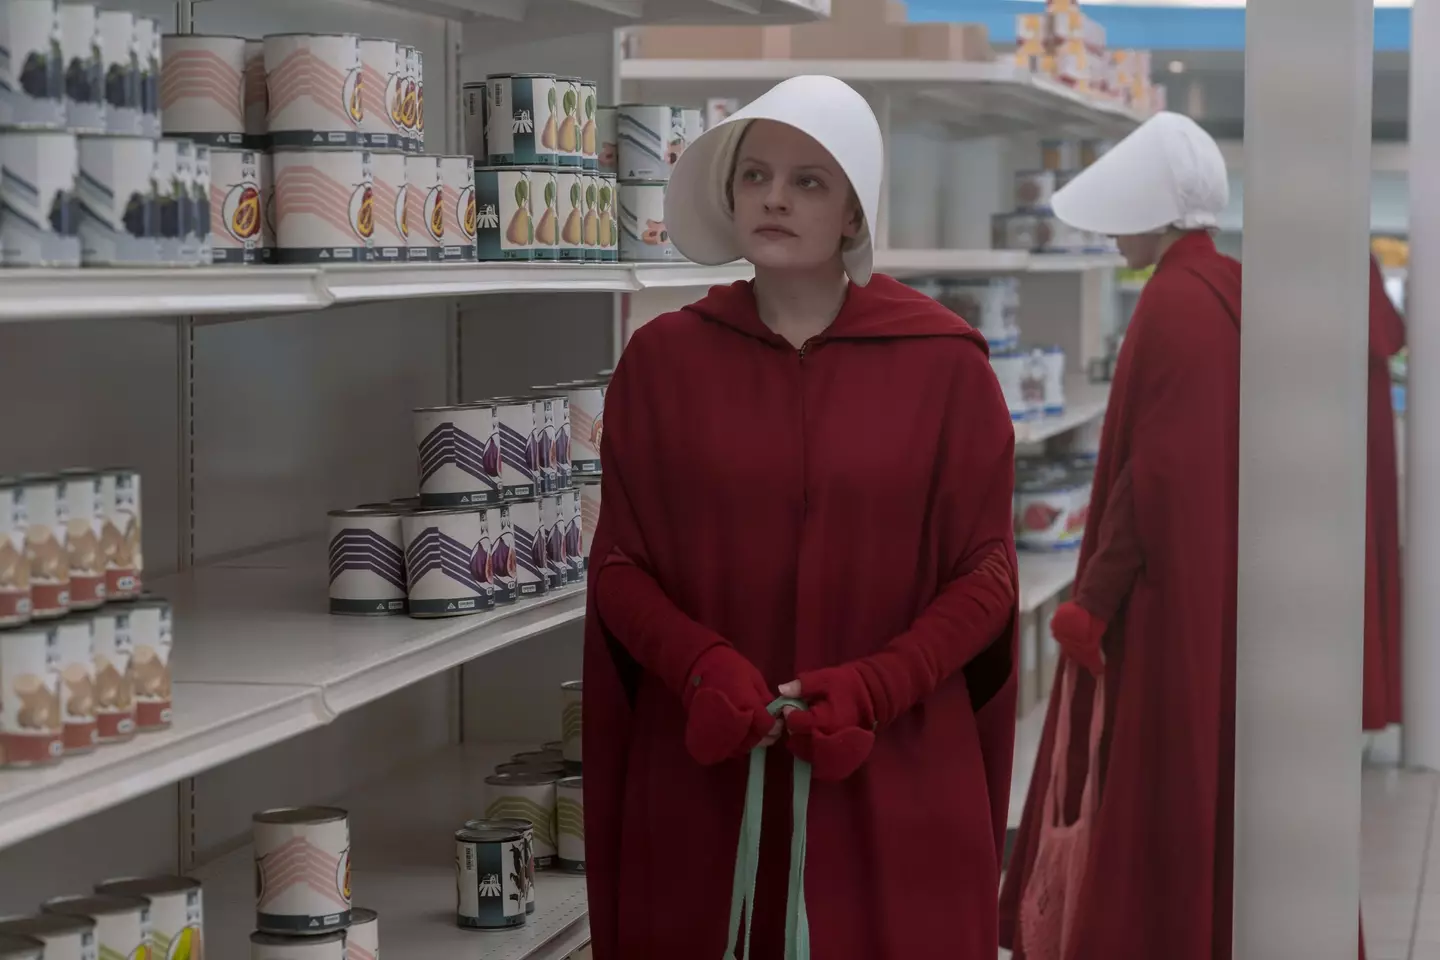 Elisabeth Moss stars as Offred in HBO's The Handmaid's Tale.